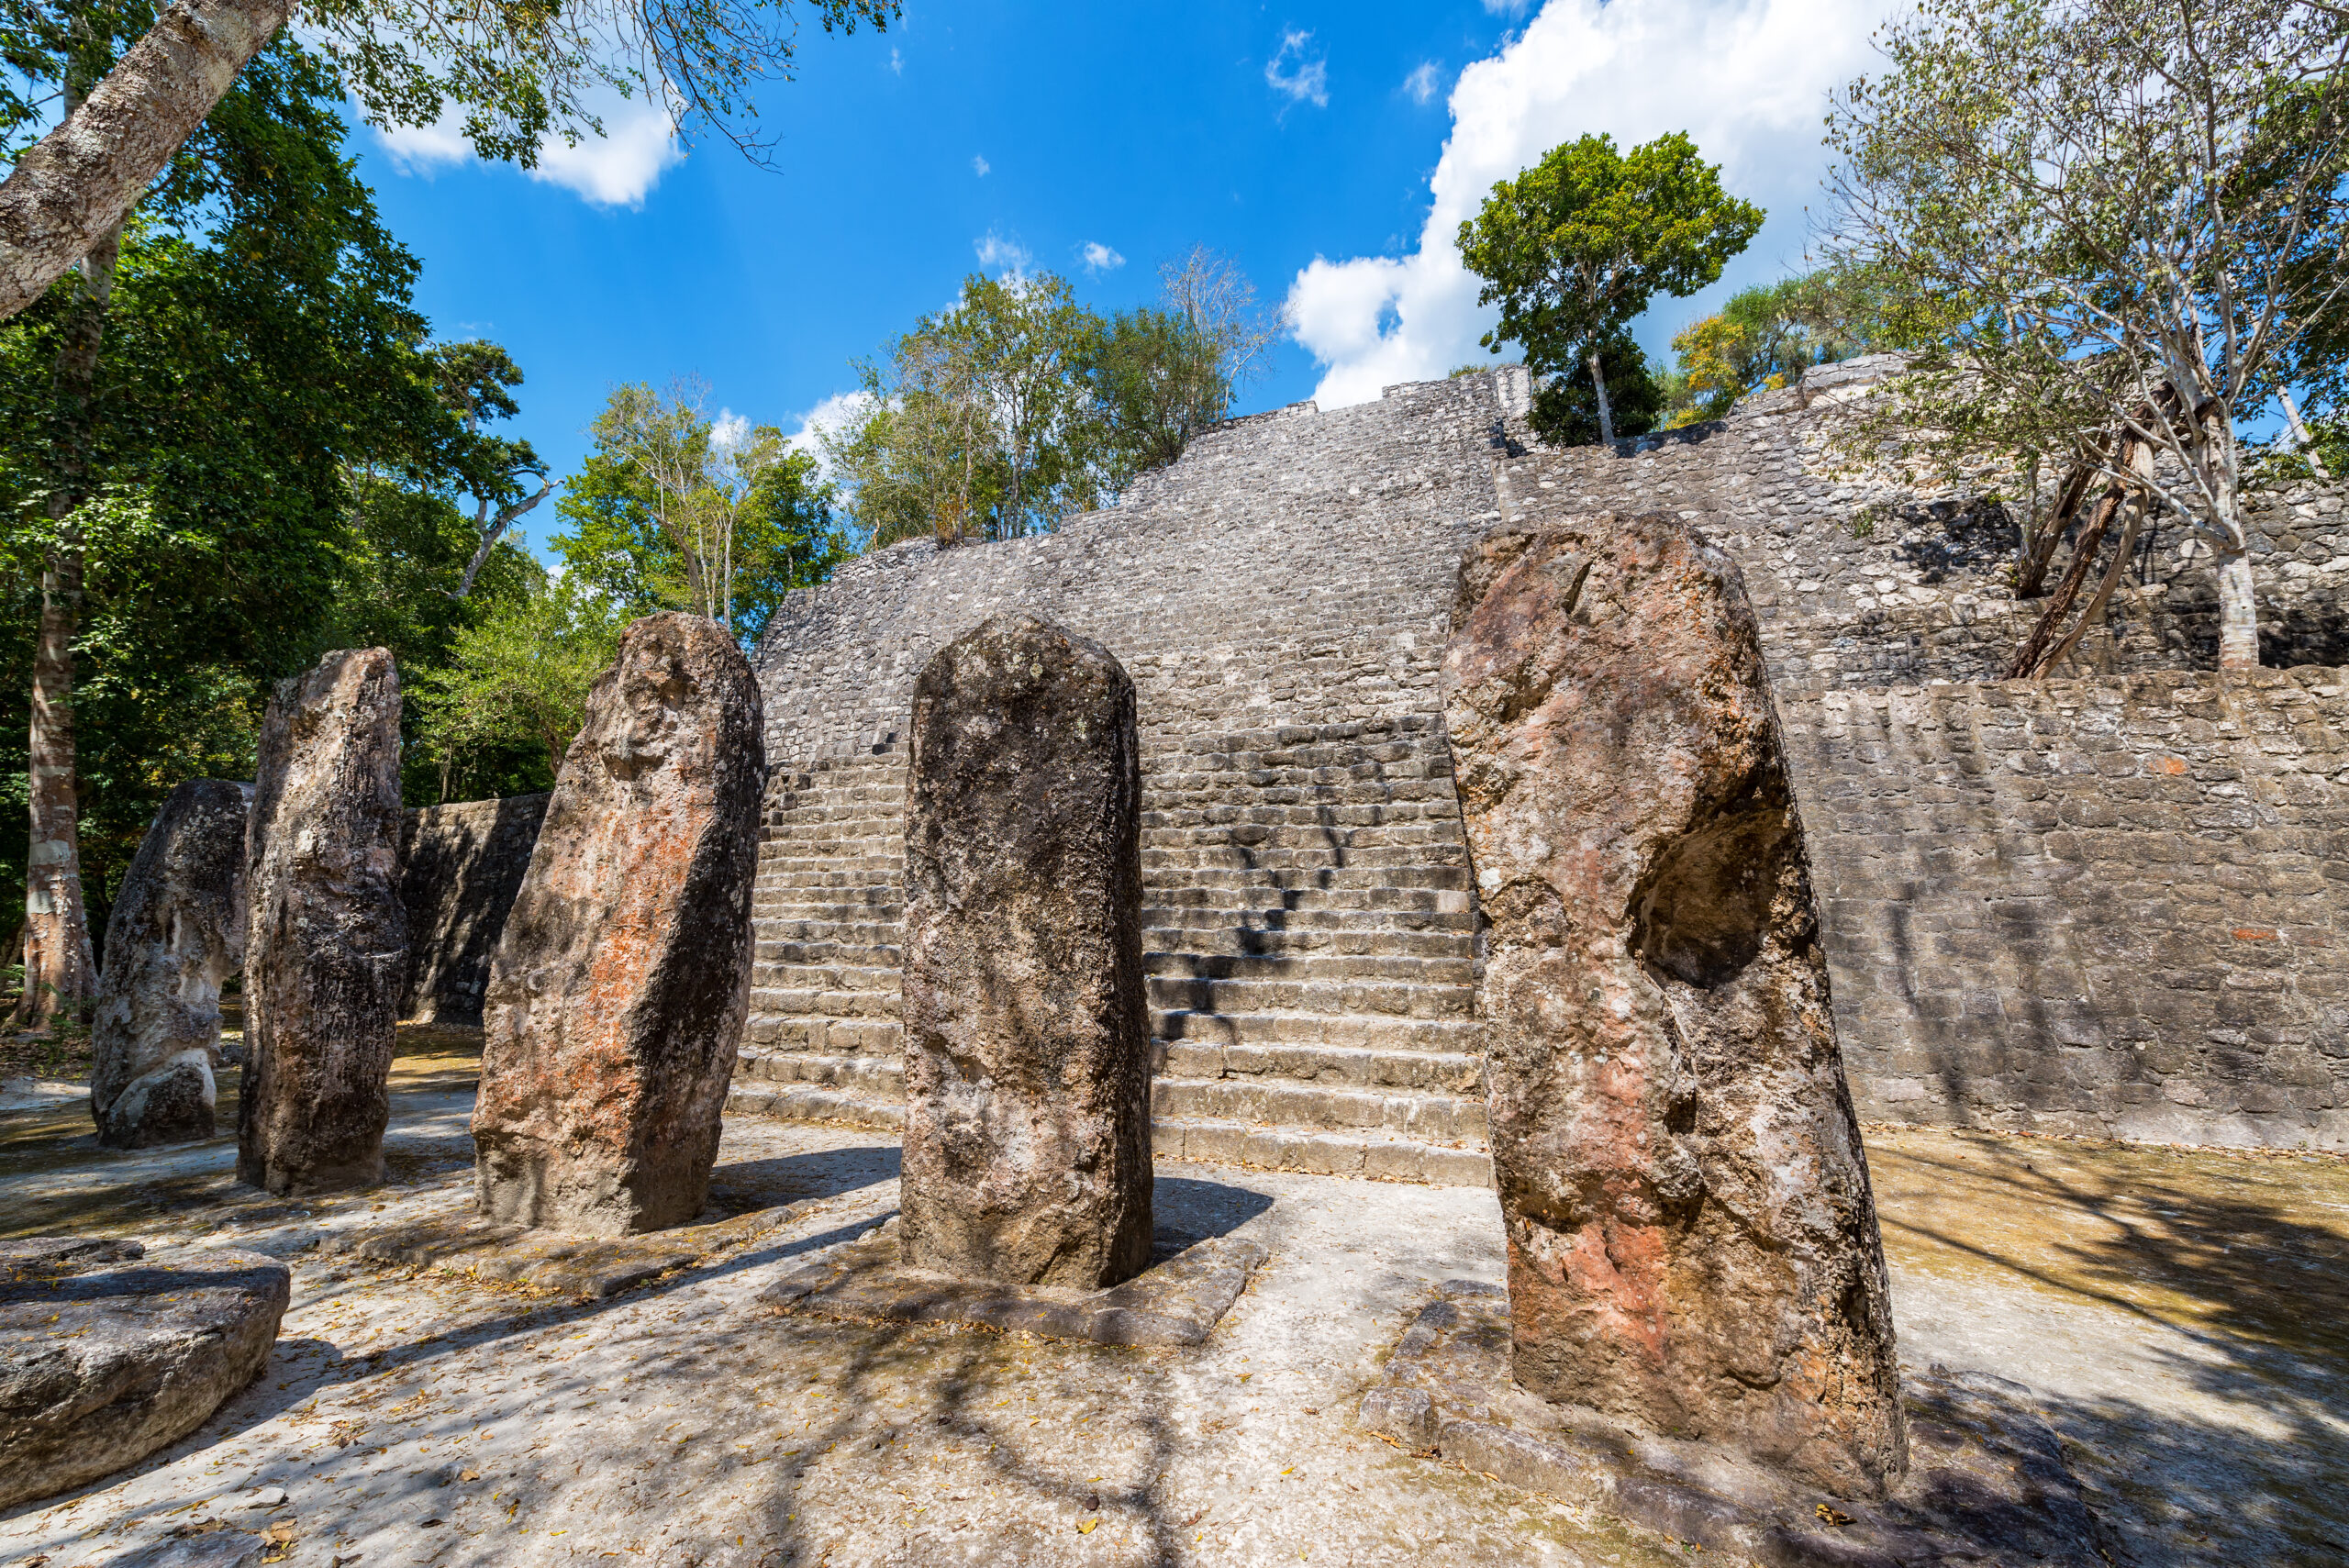 maya stelae at the Calakmul archeological site in Mexico